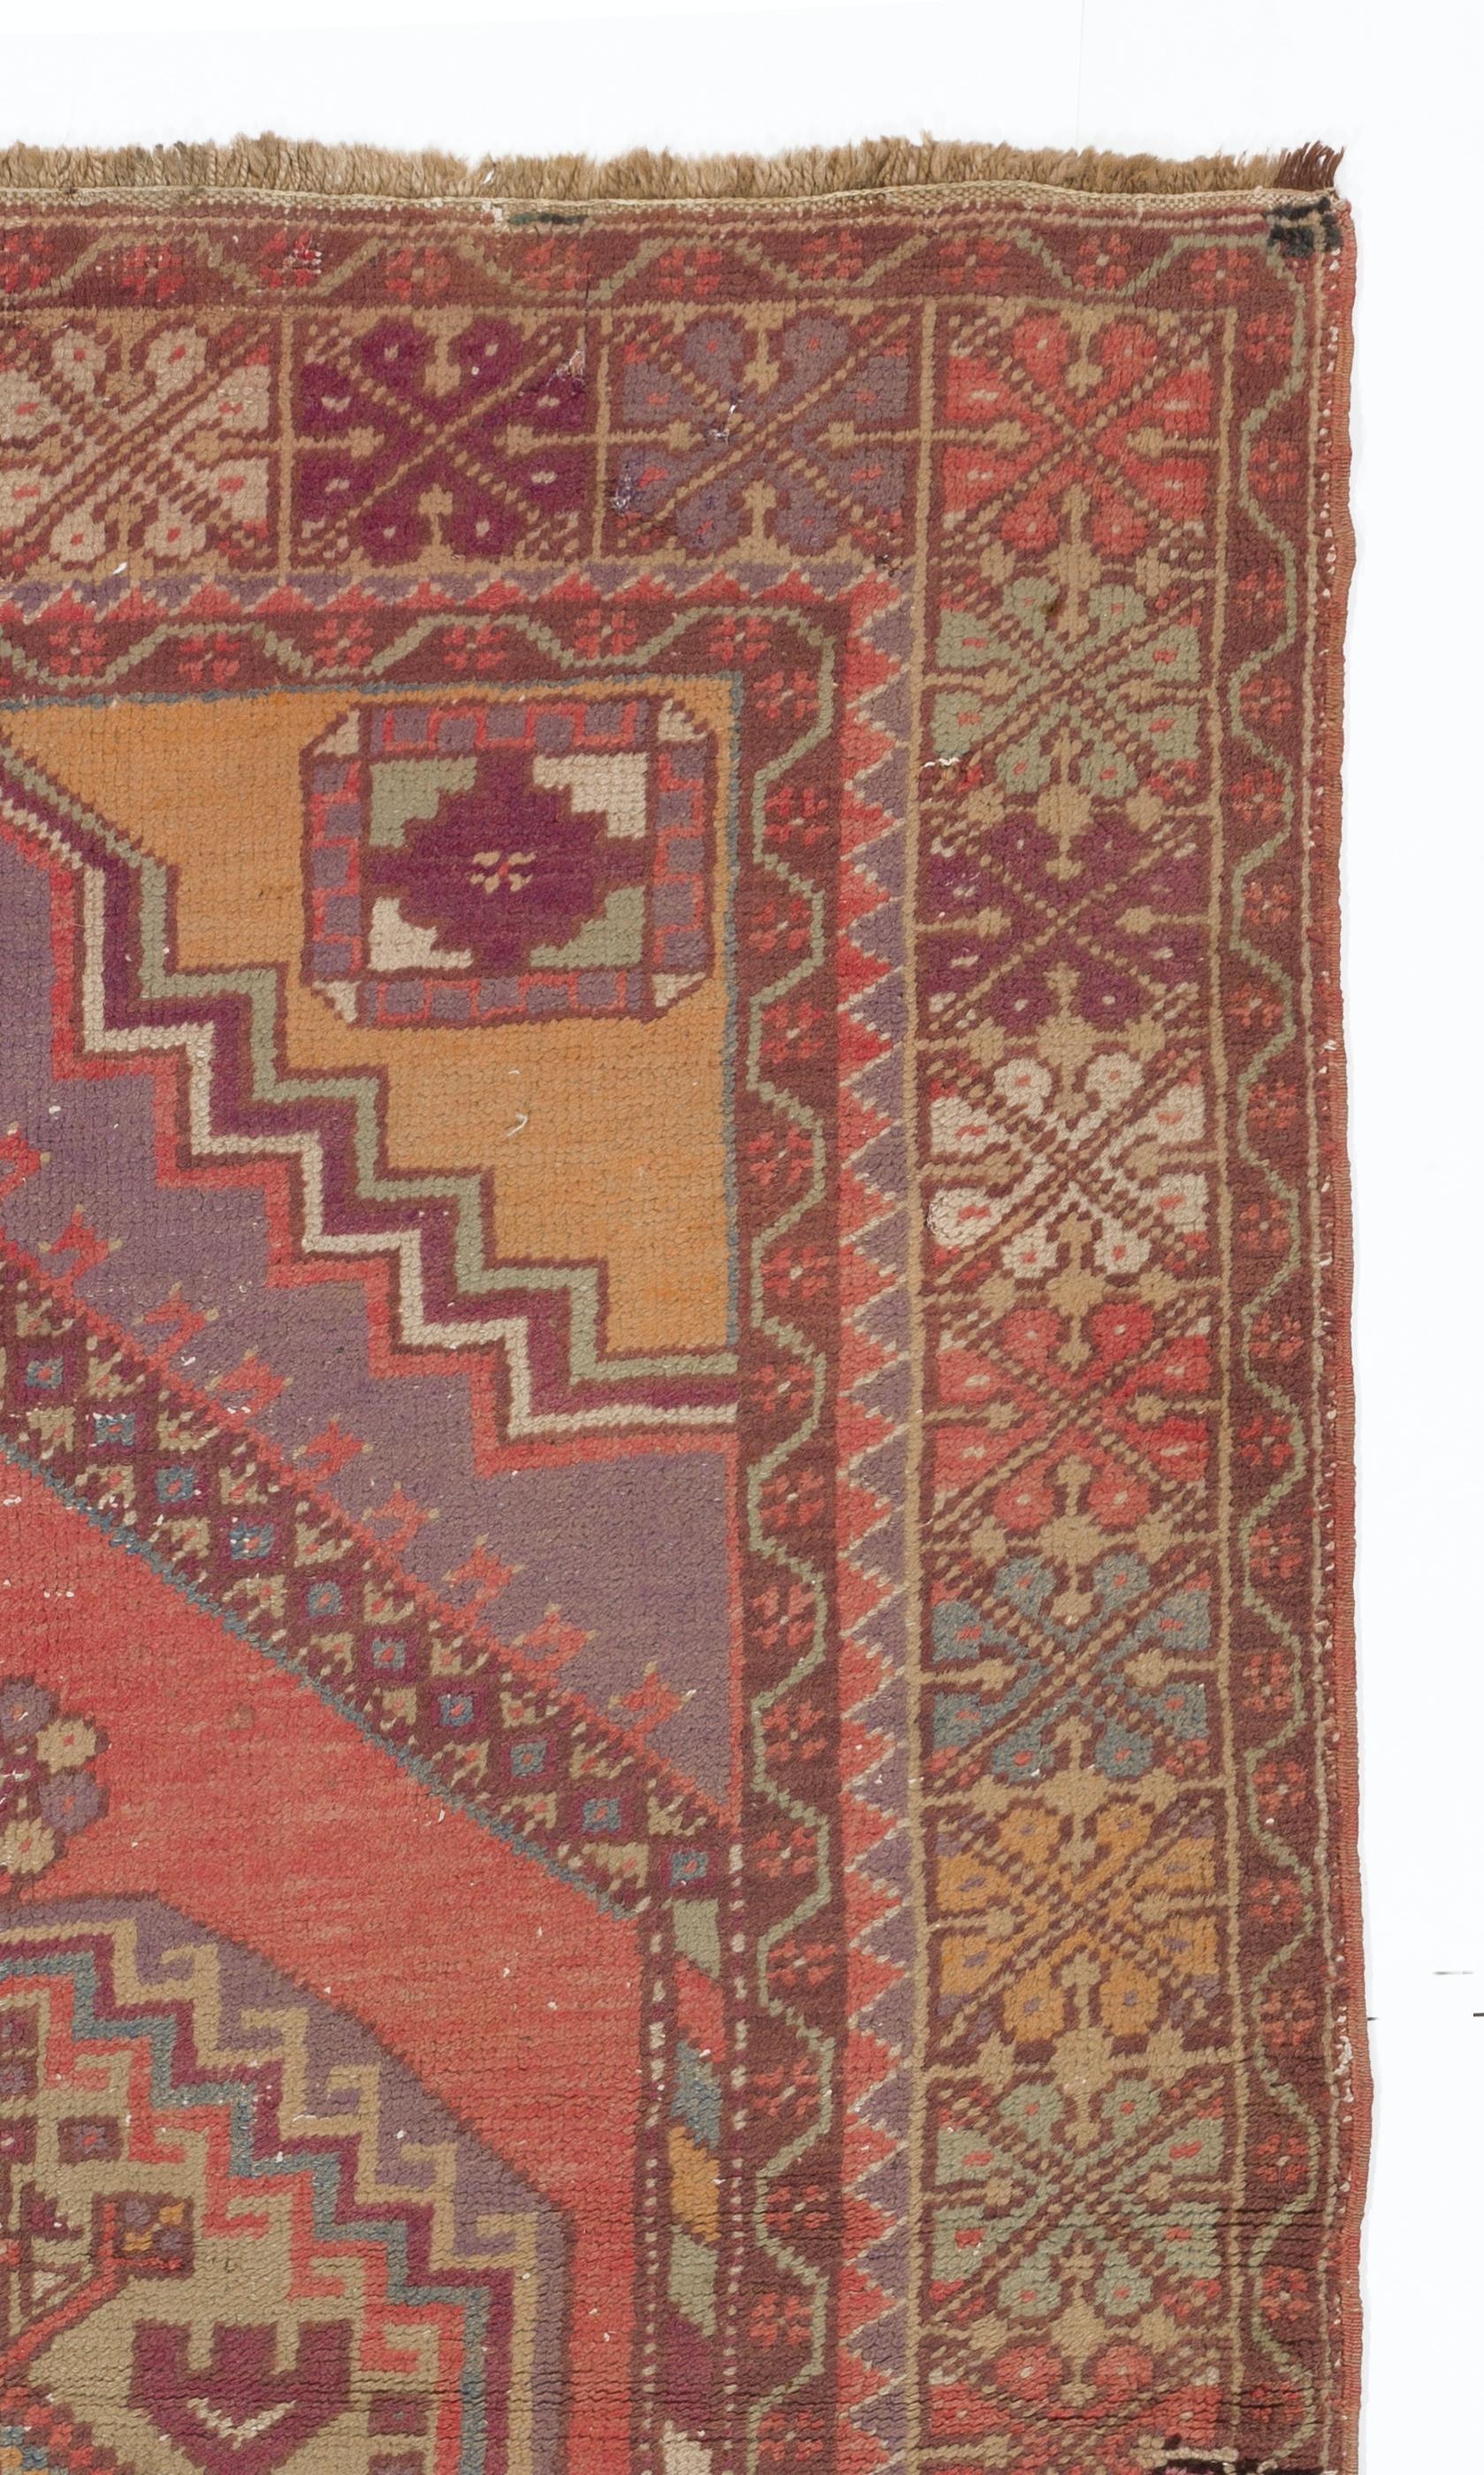 Country 3.8x6.5 Ft Unique Turkish Village Rug, Vintage Hand-Knotted Oriental Wool Carpet For Sale